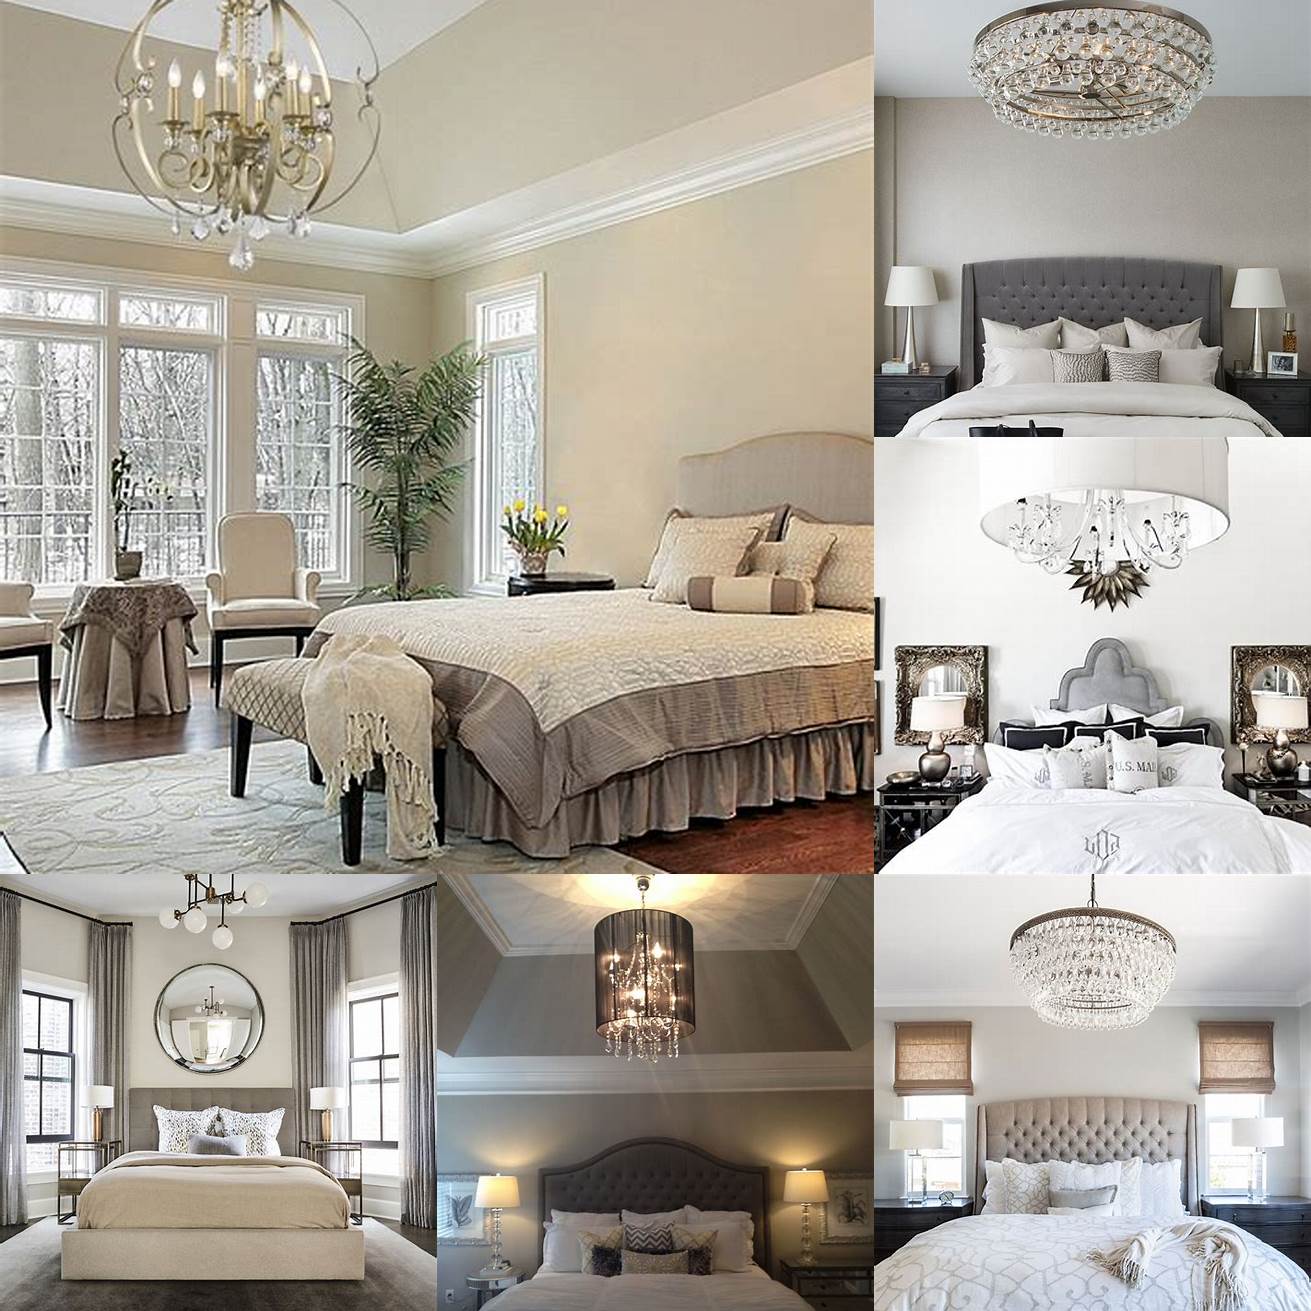 Image Master bedroom with a chandelier and bedside lamps